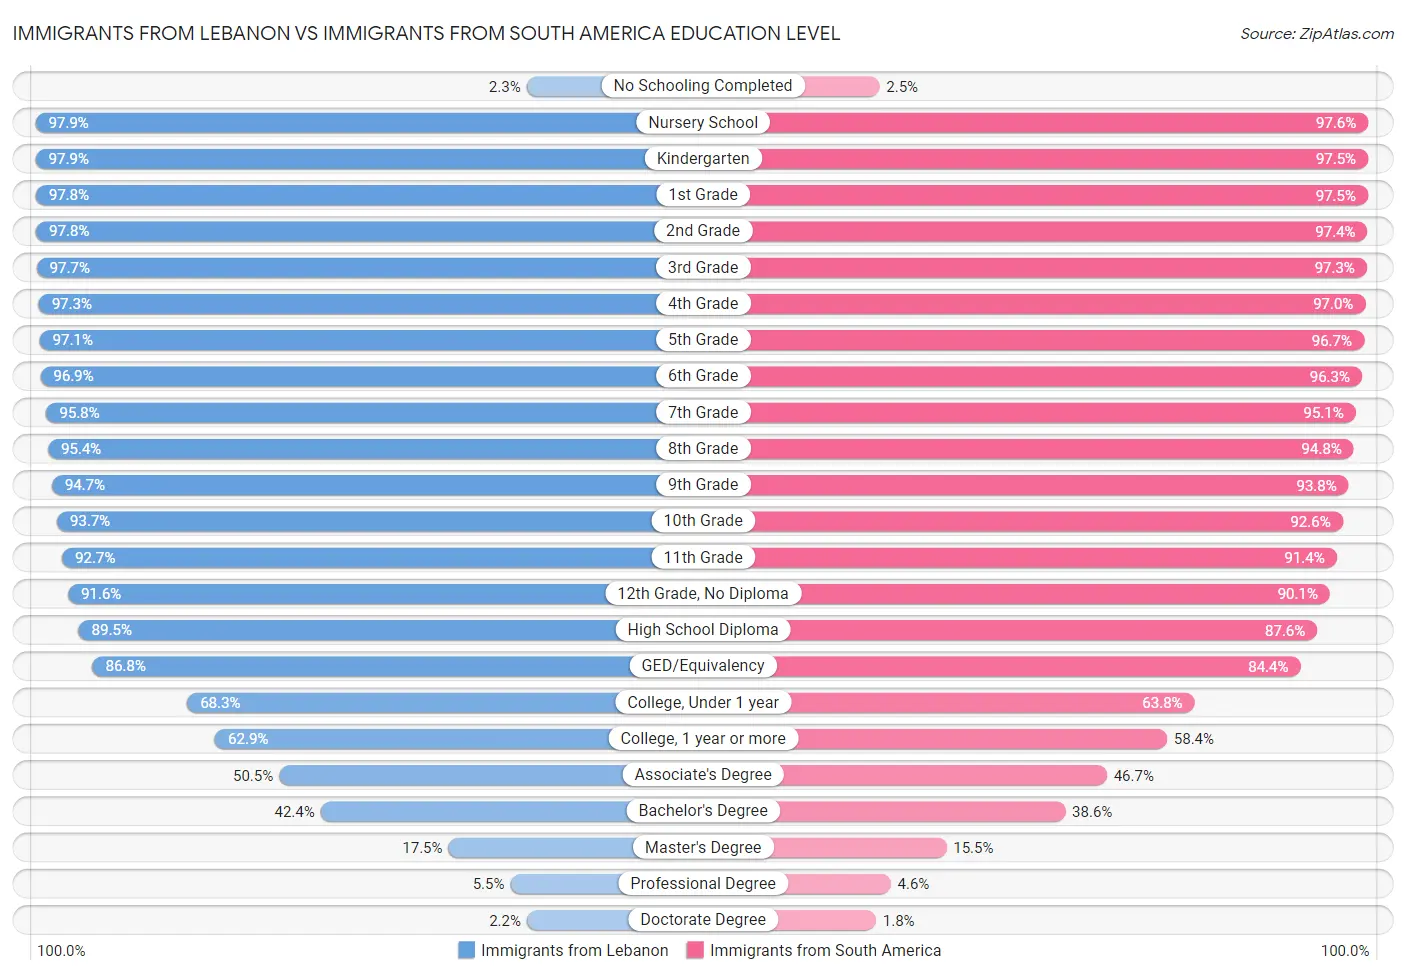 Immigrants from Lebanon vs Immigrants from South America Education Level